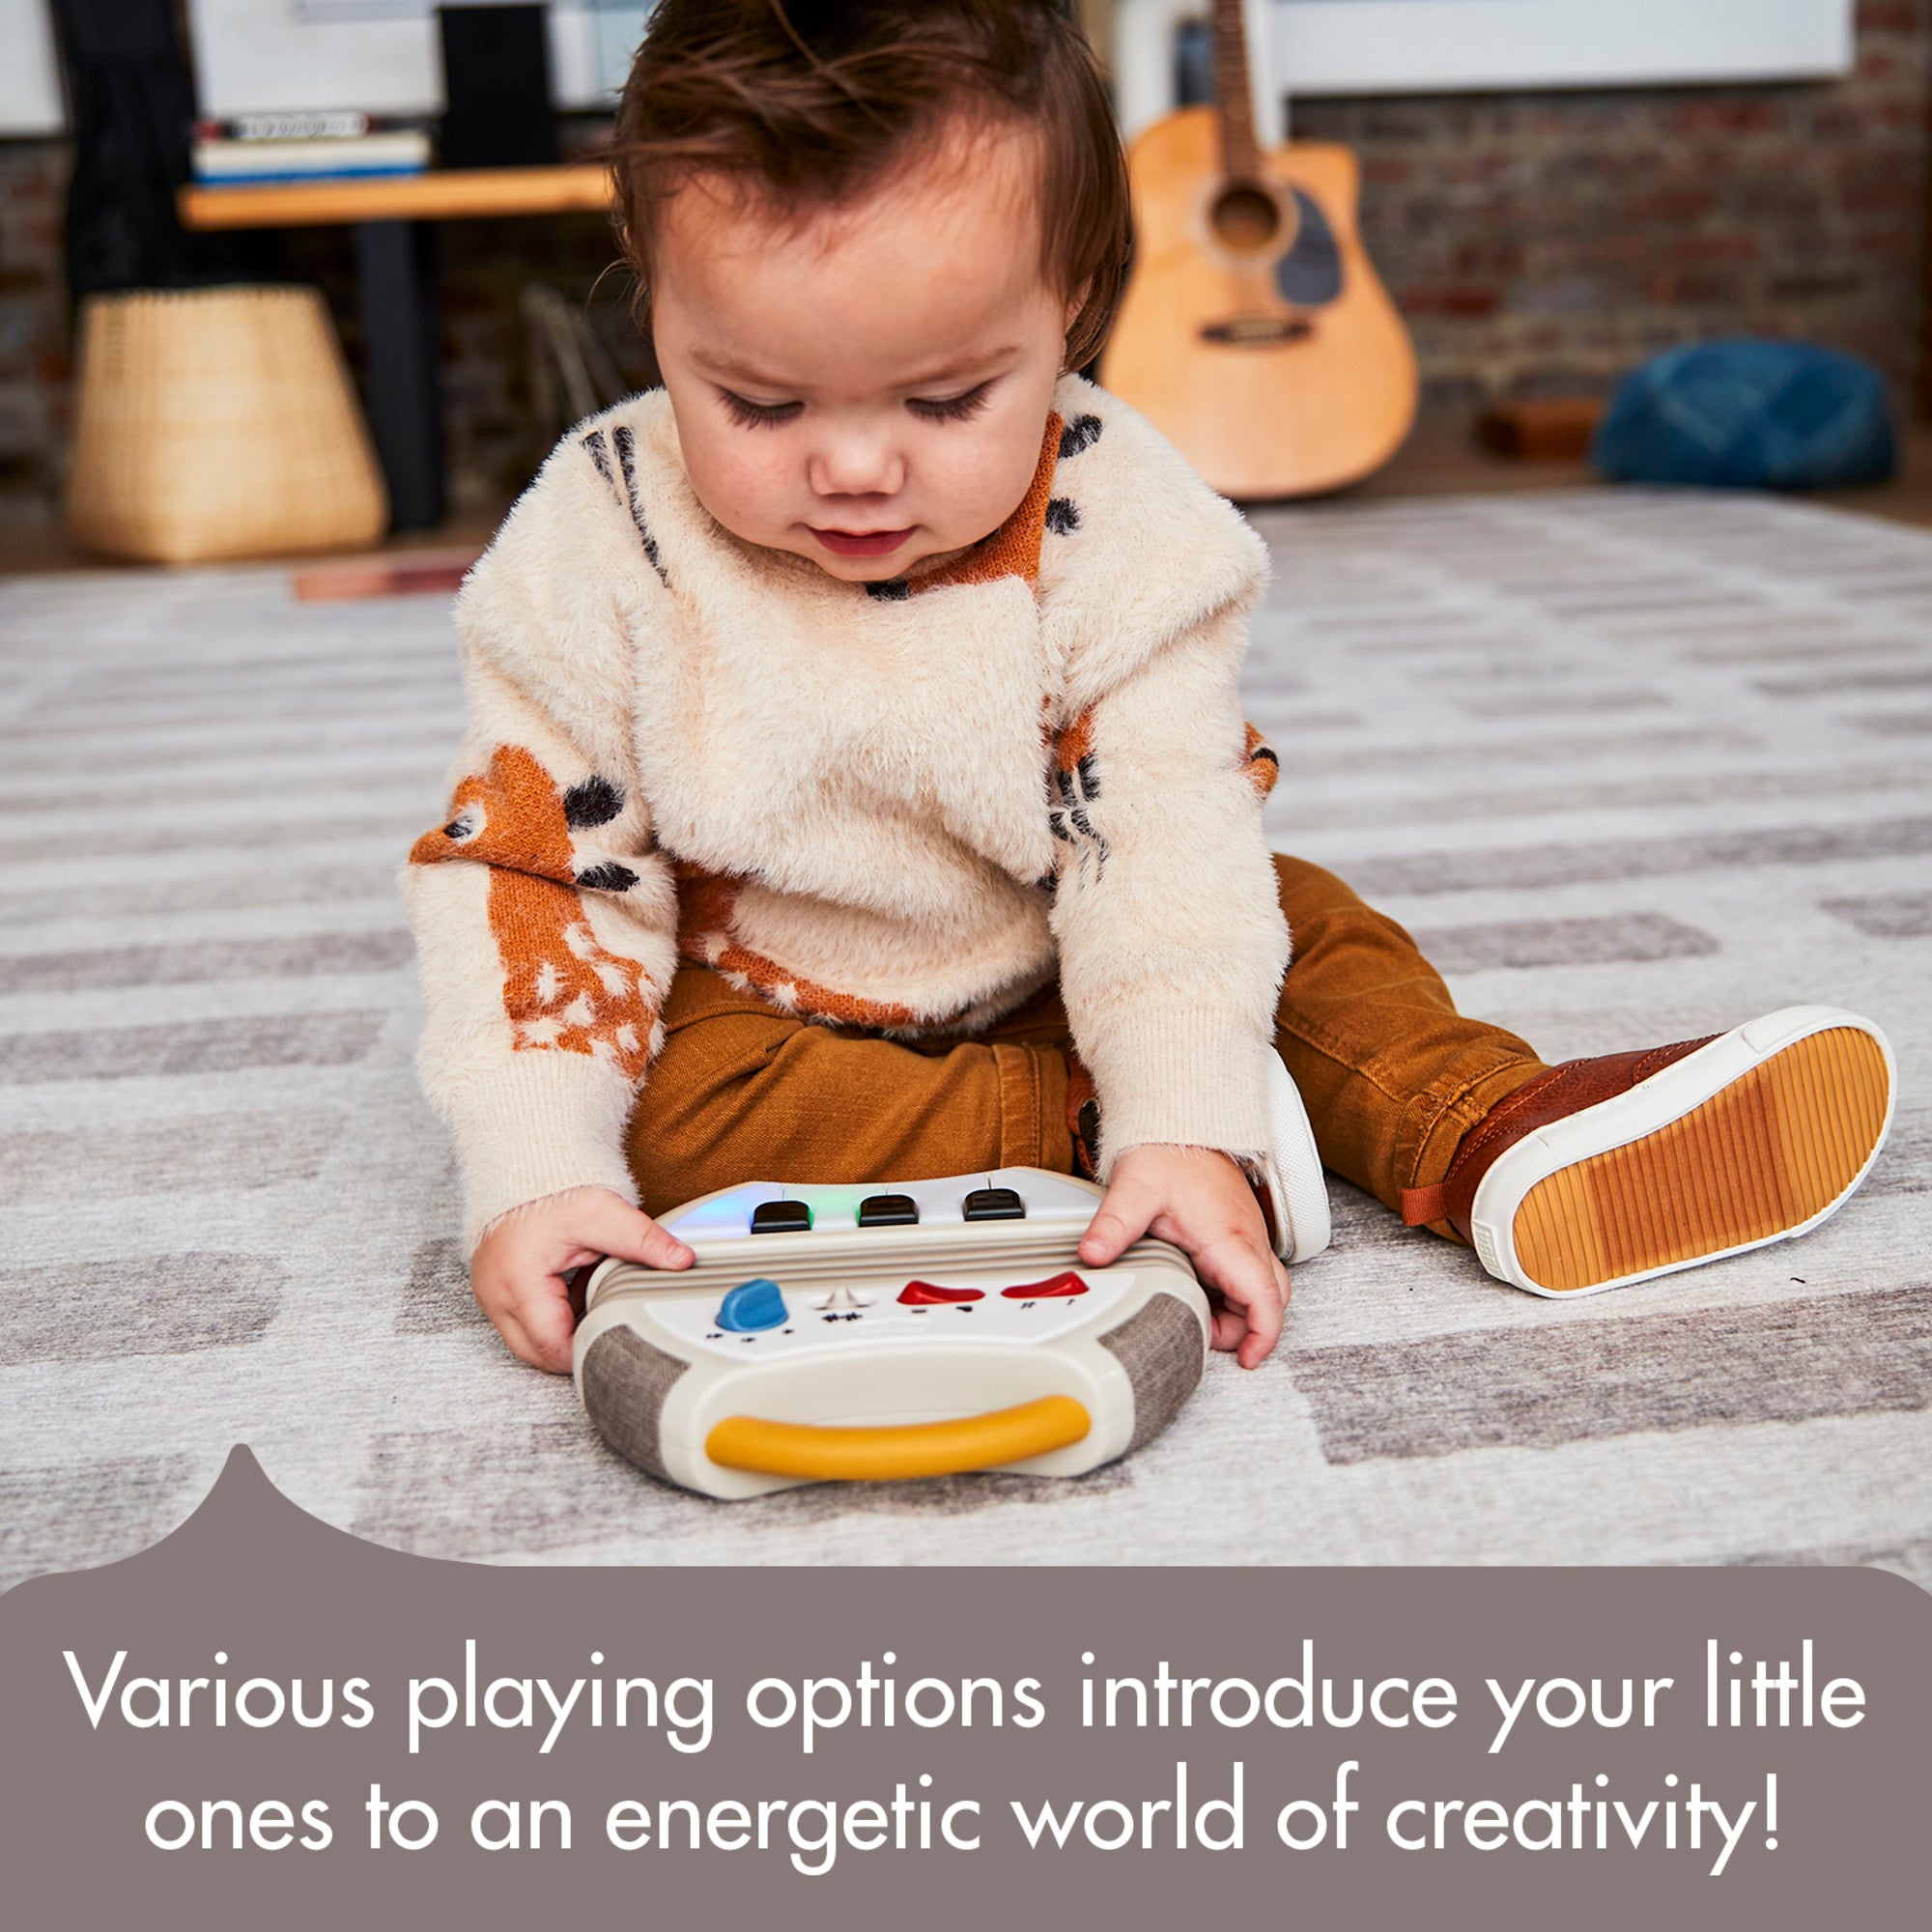 Tiny Rockers Accordion - Various playing options introduce your little ones to an energetic world of creativity